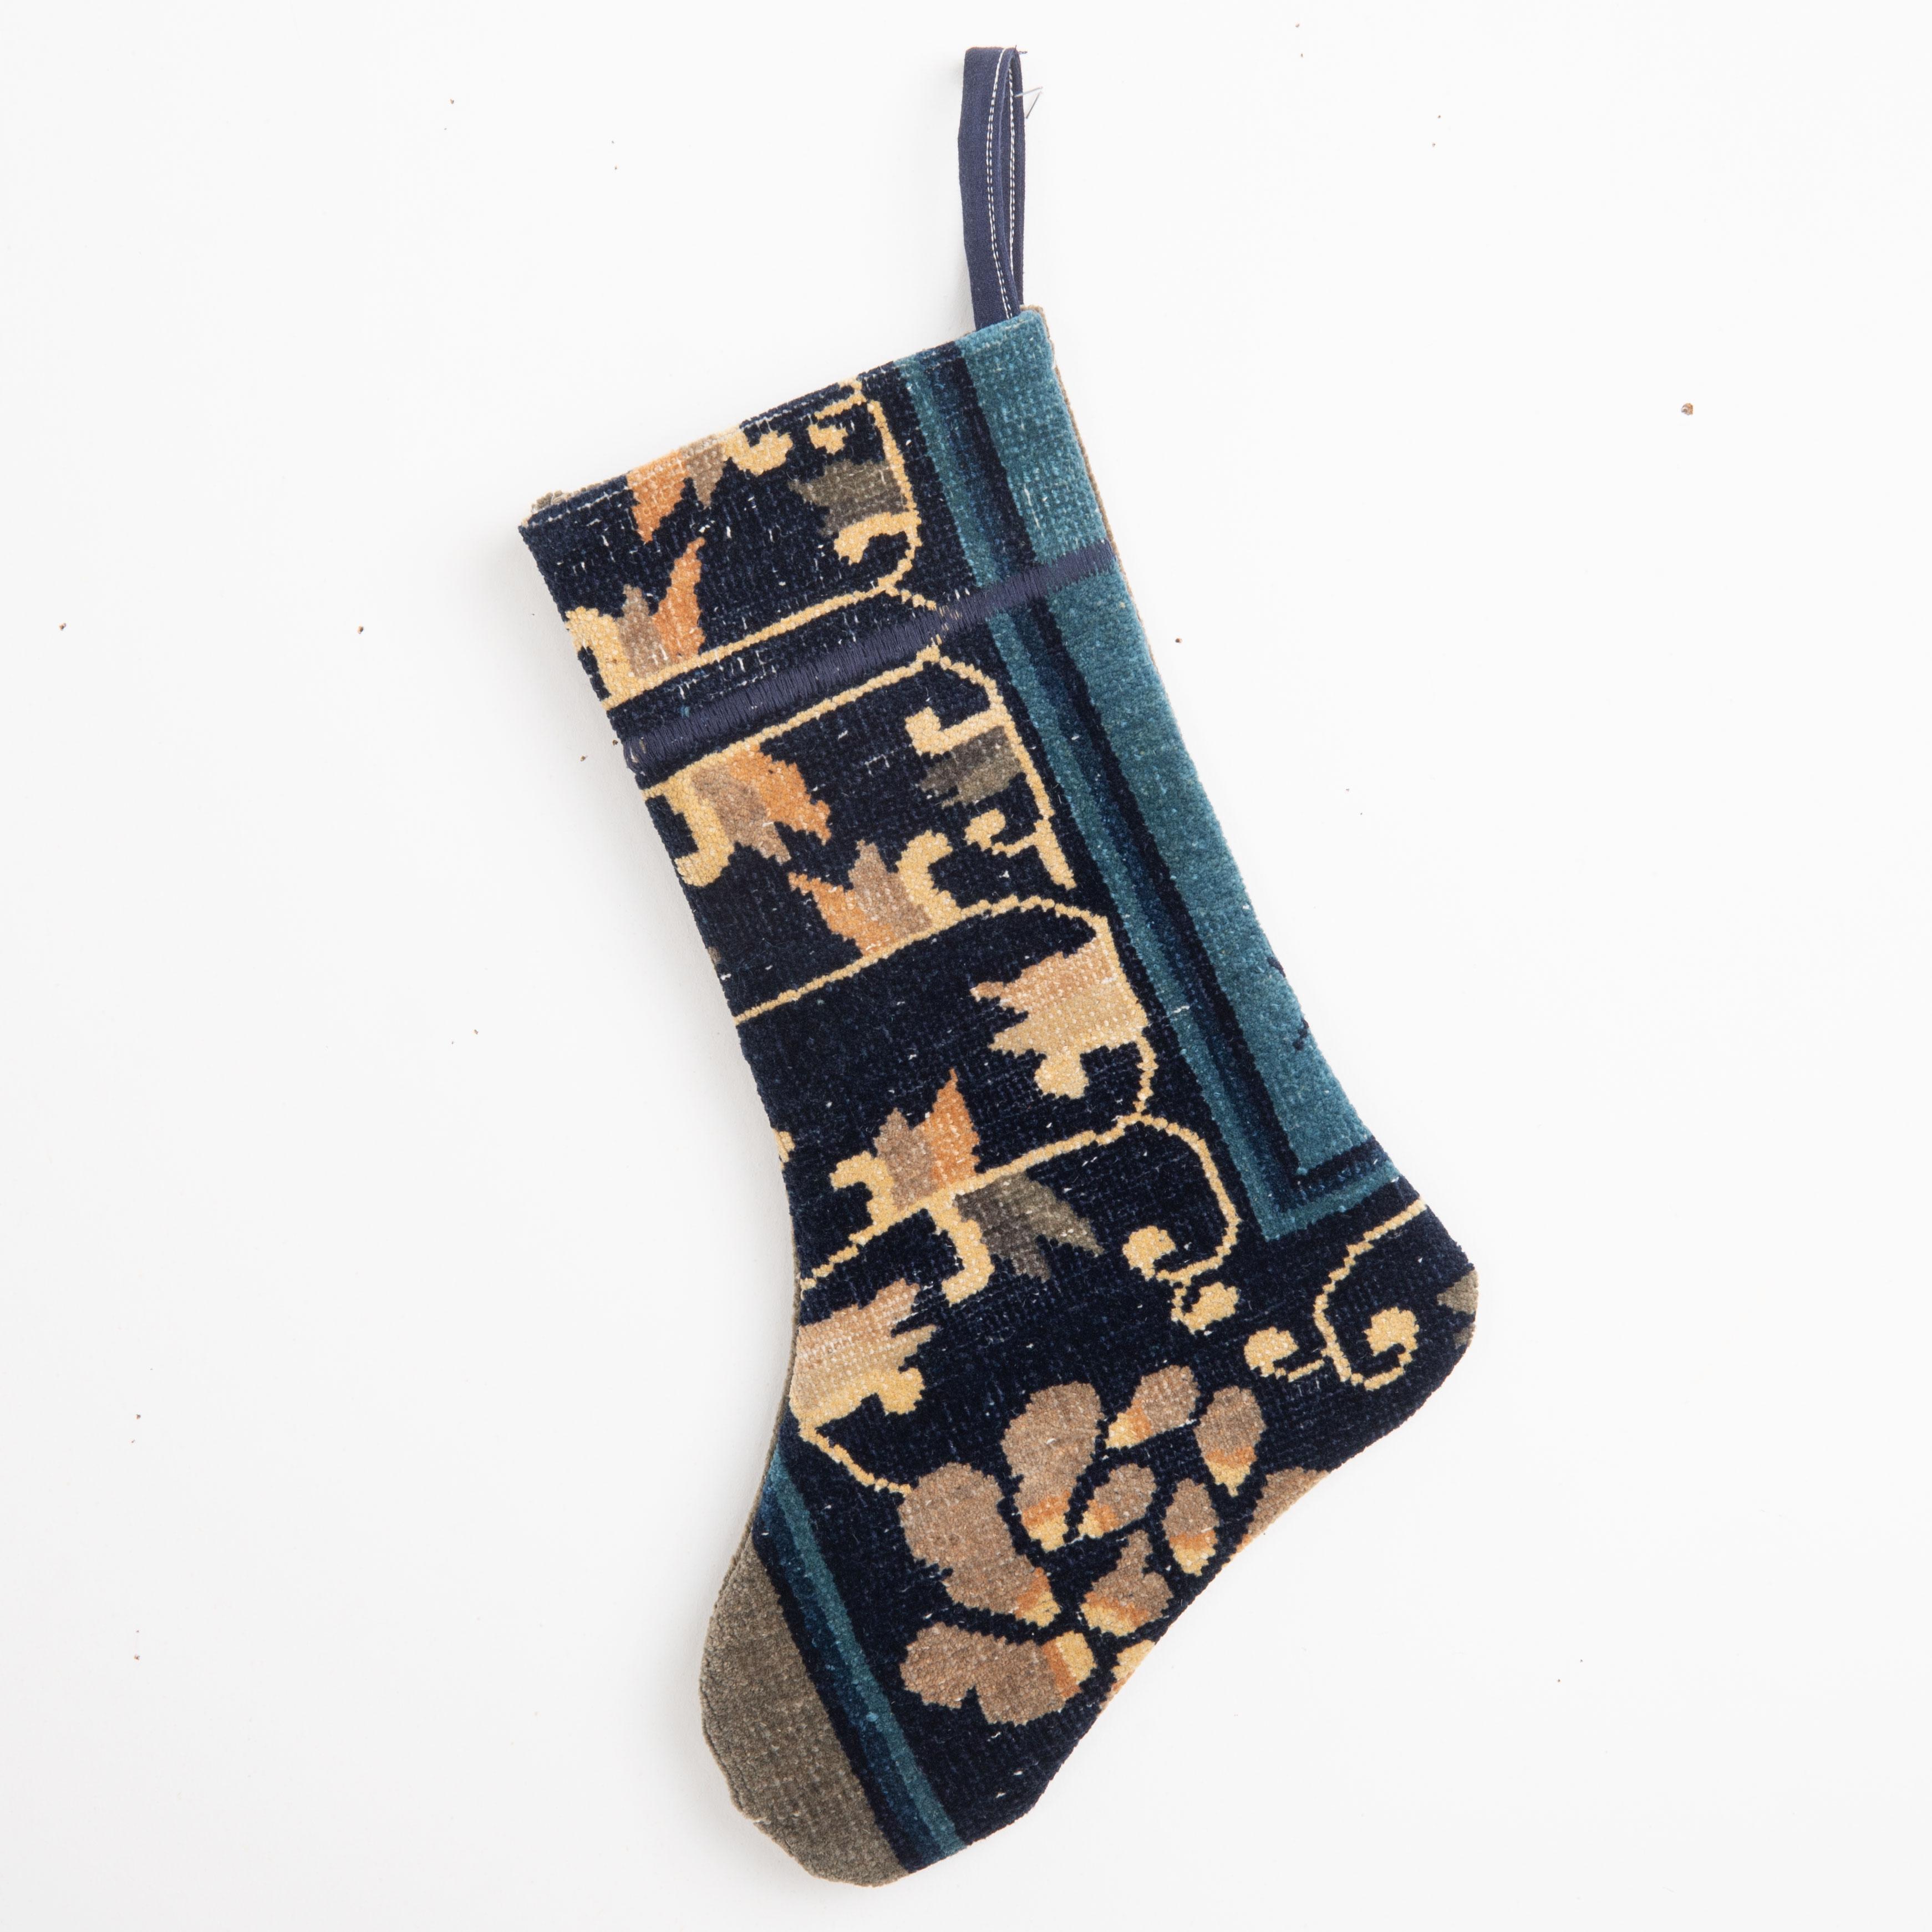 This Christmas Stocking was made from a late 19th or Early 20th C. Chinese rug fragments.

Please note, this stocking was made from Chinese rug fragments.


